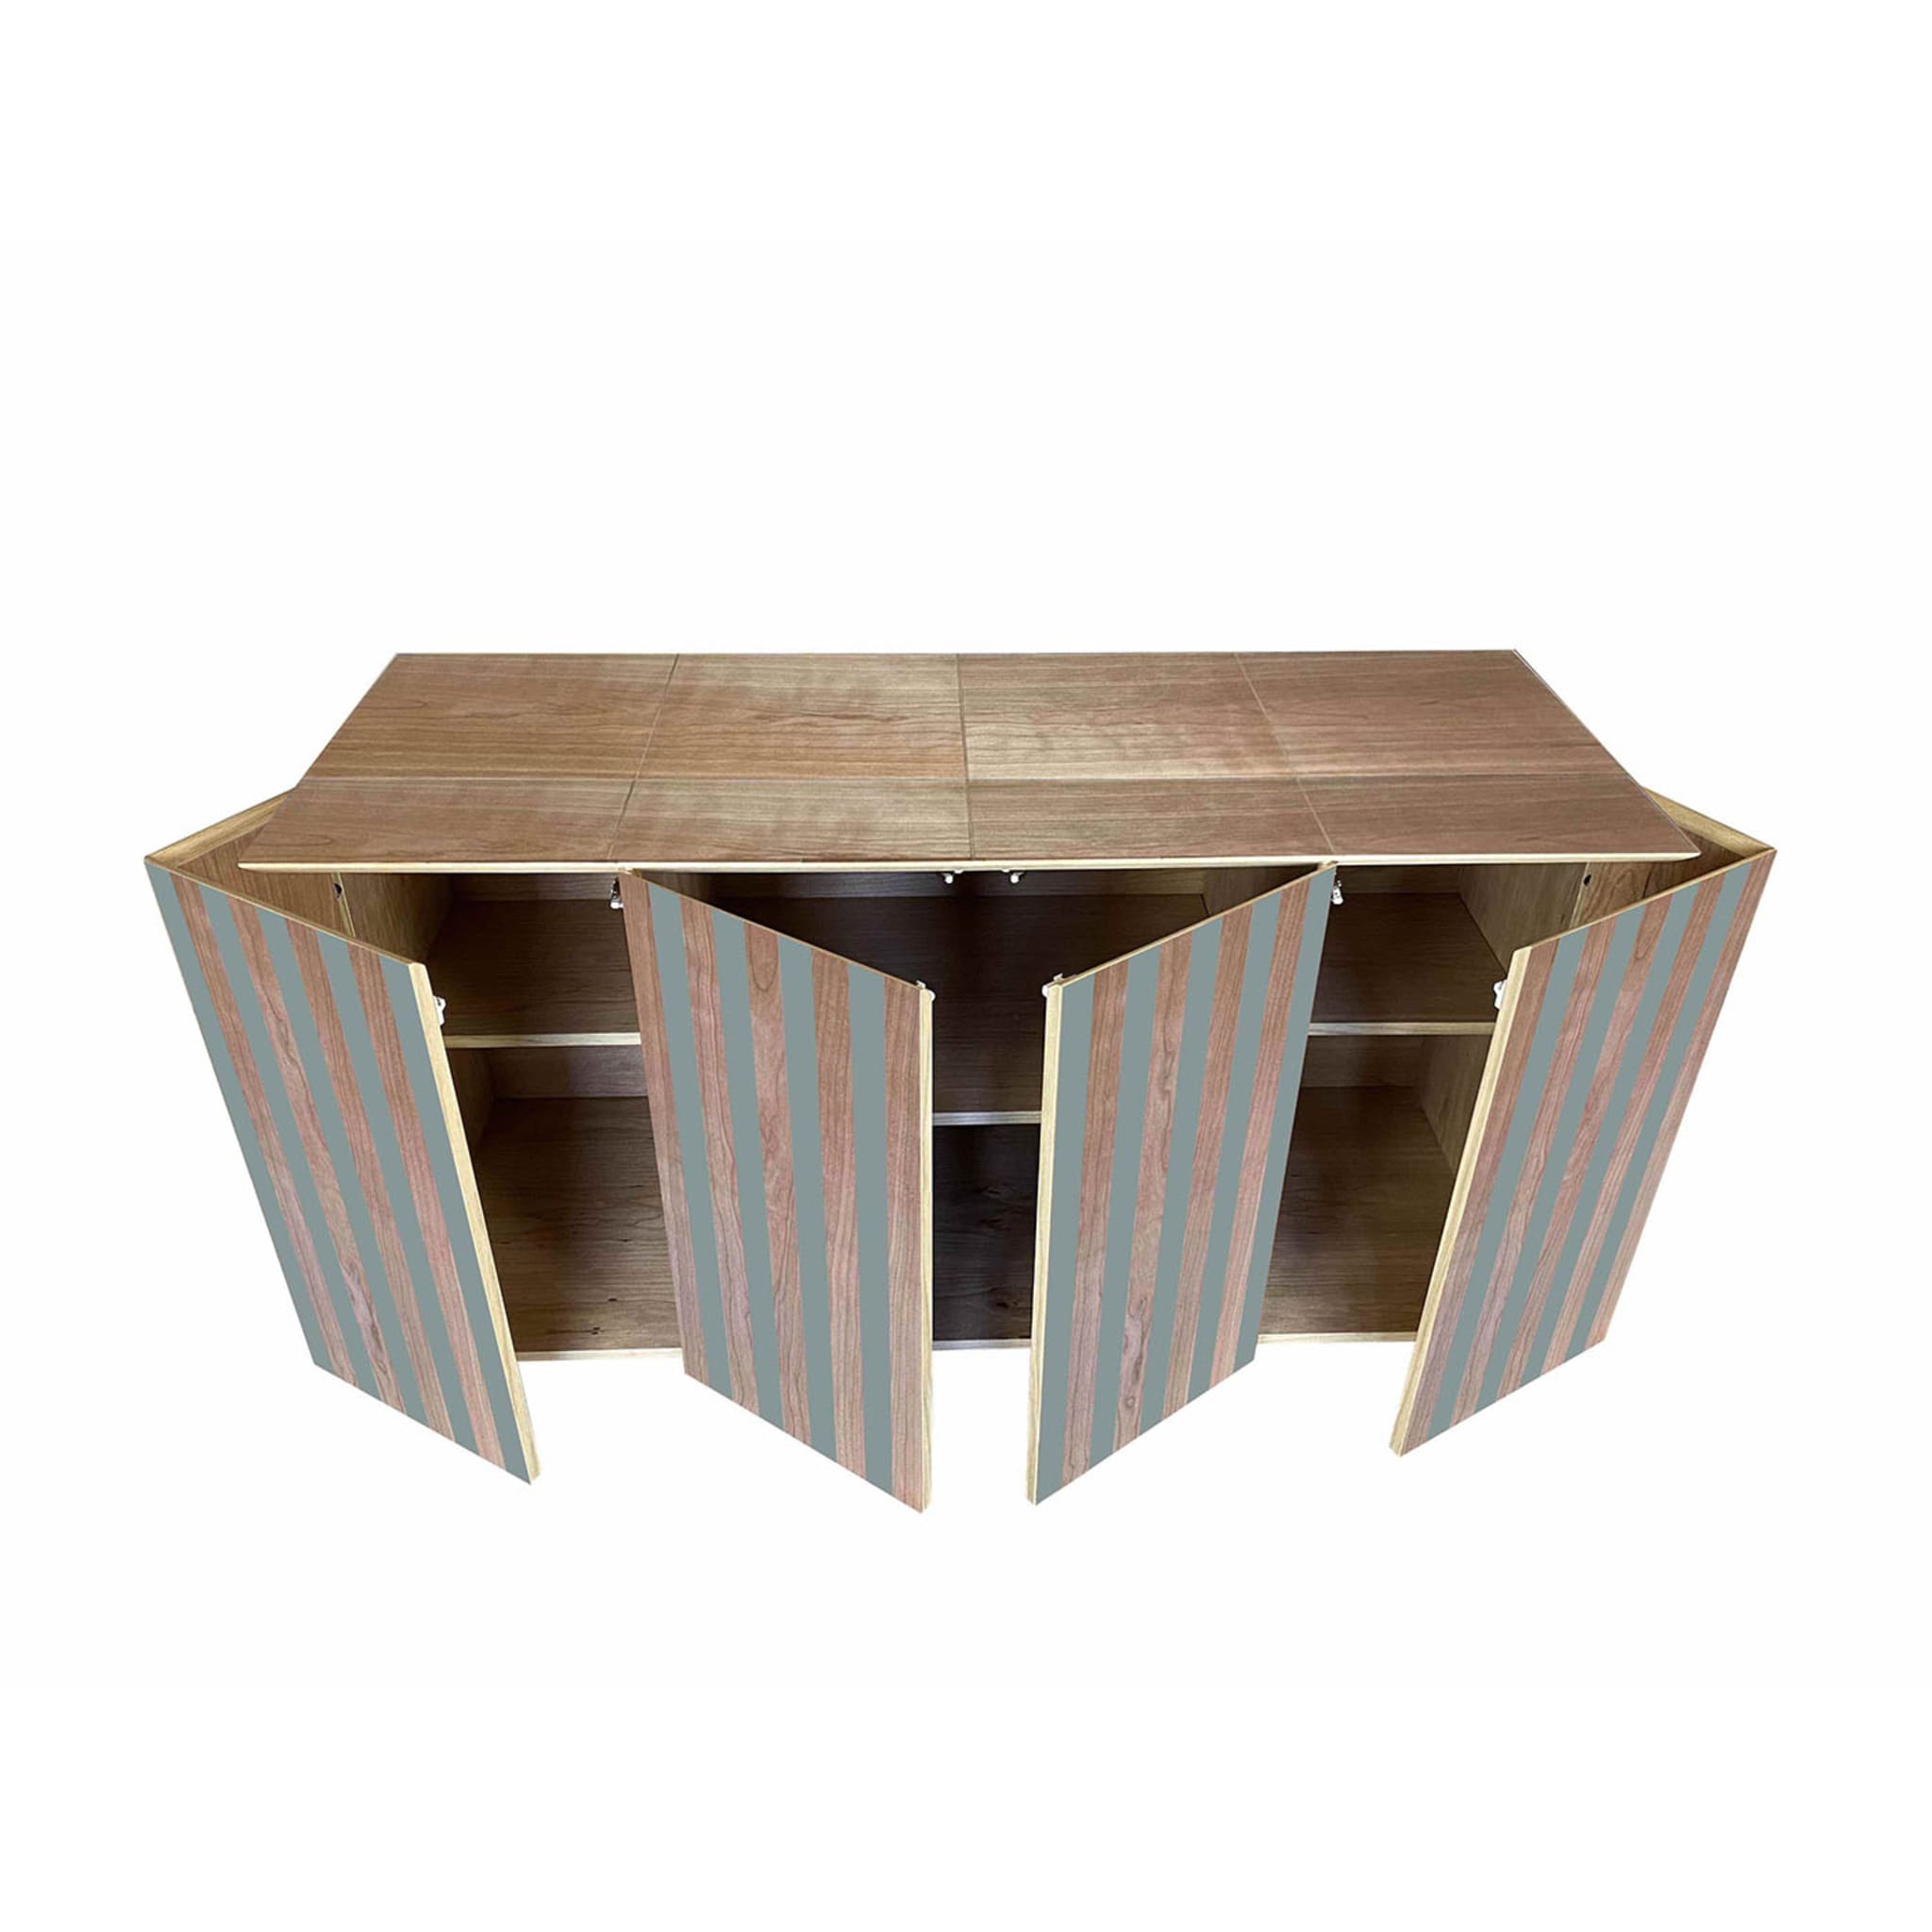 Md3 4-Door Striped Sideboard by Meccani Studio - Alternative view 4